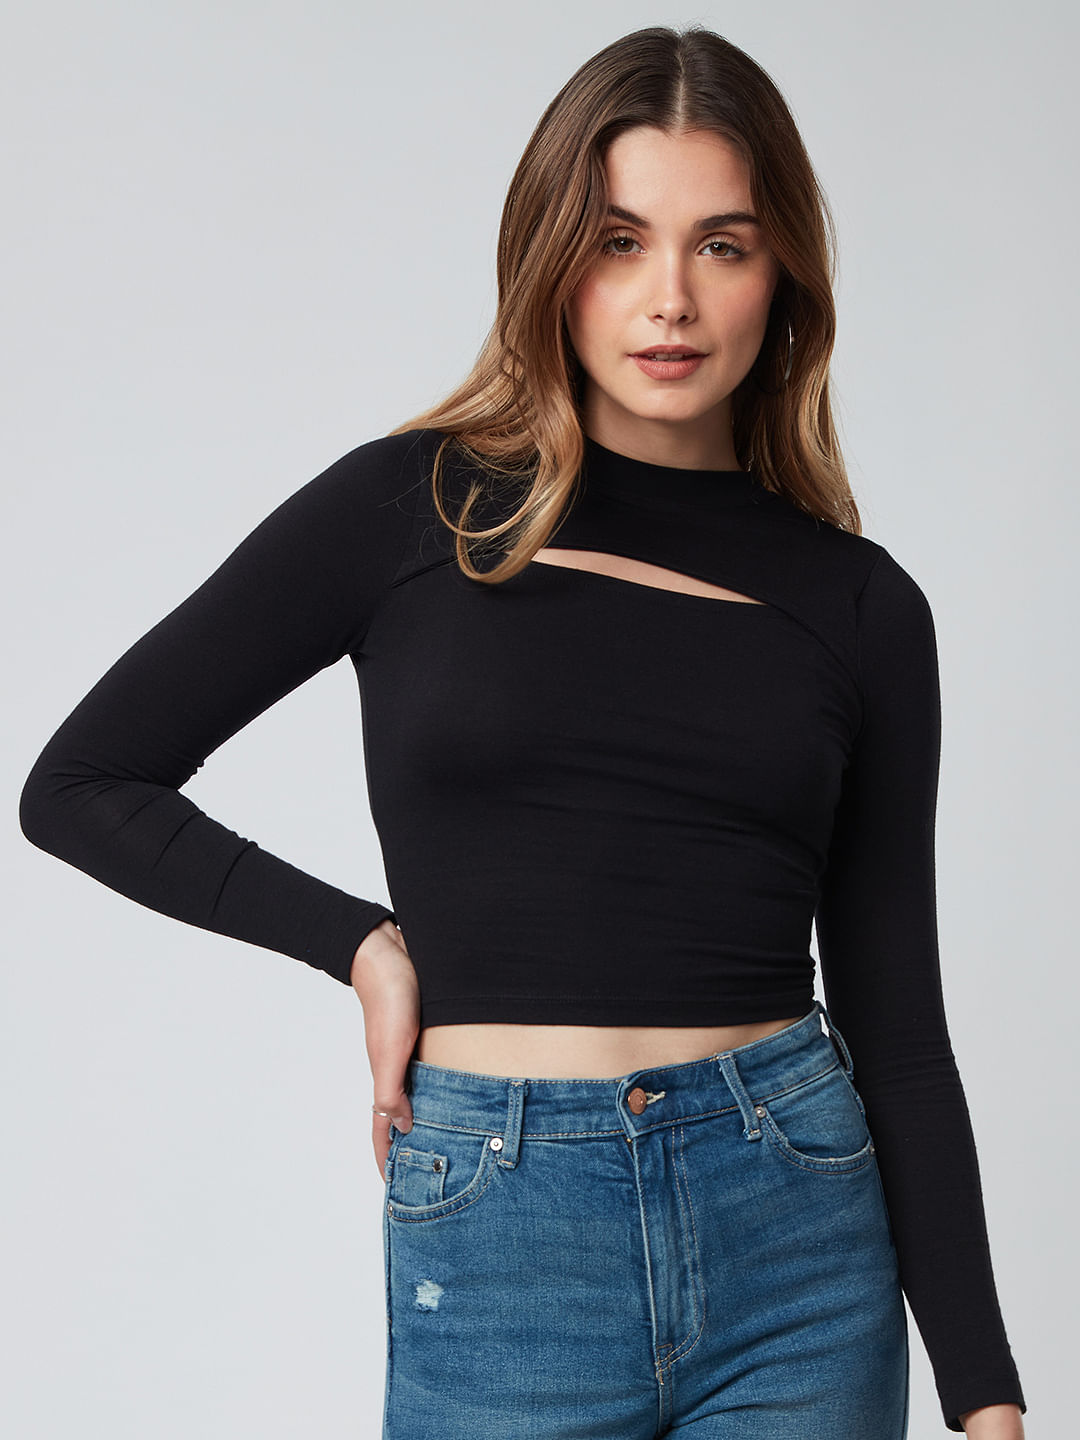 Buy Solids: Black Women's Cut Out Crop Top online at The Souled Store